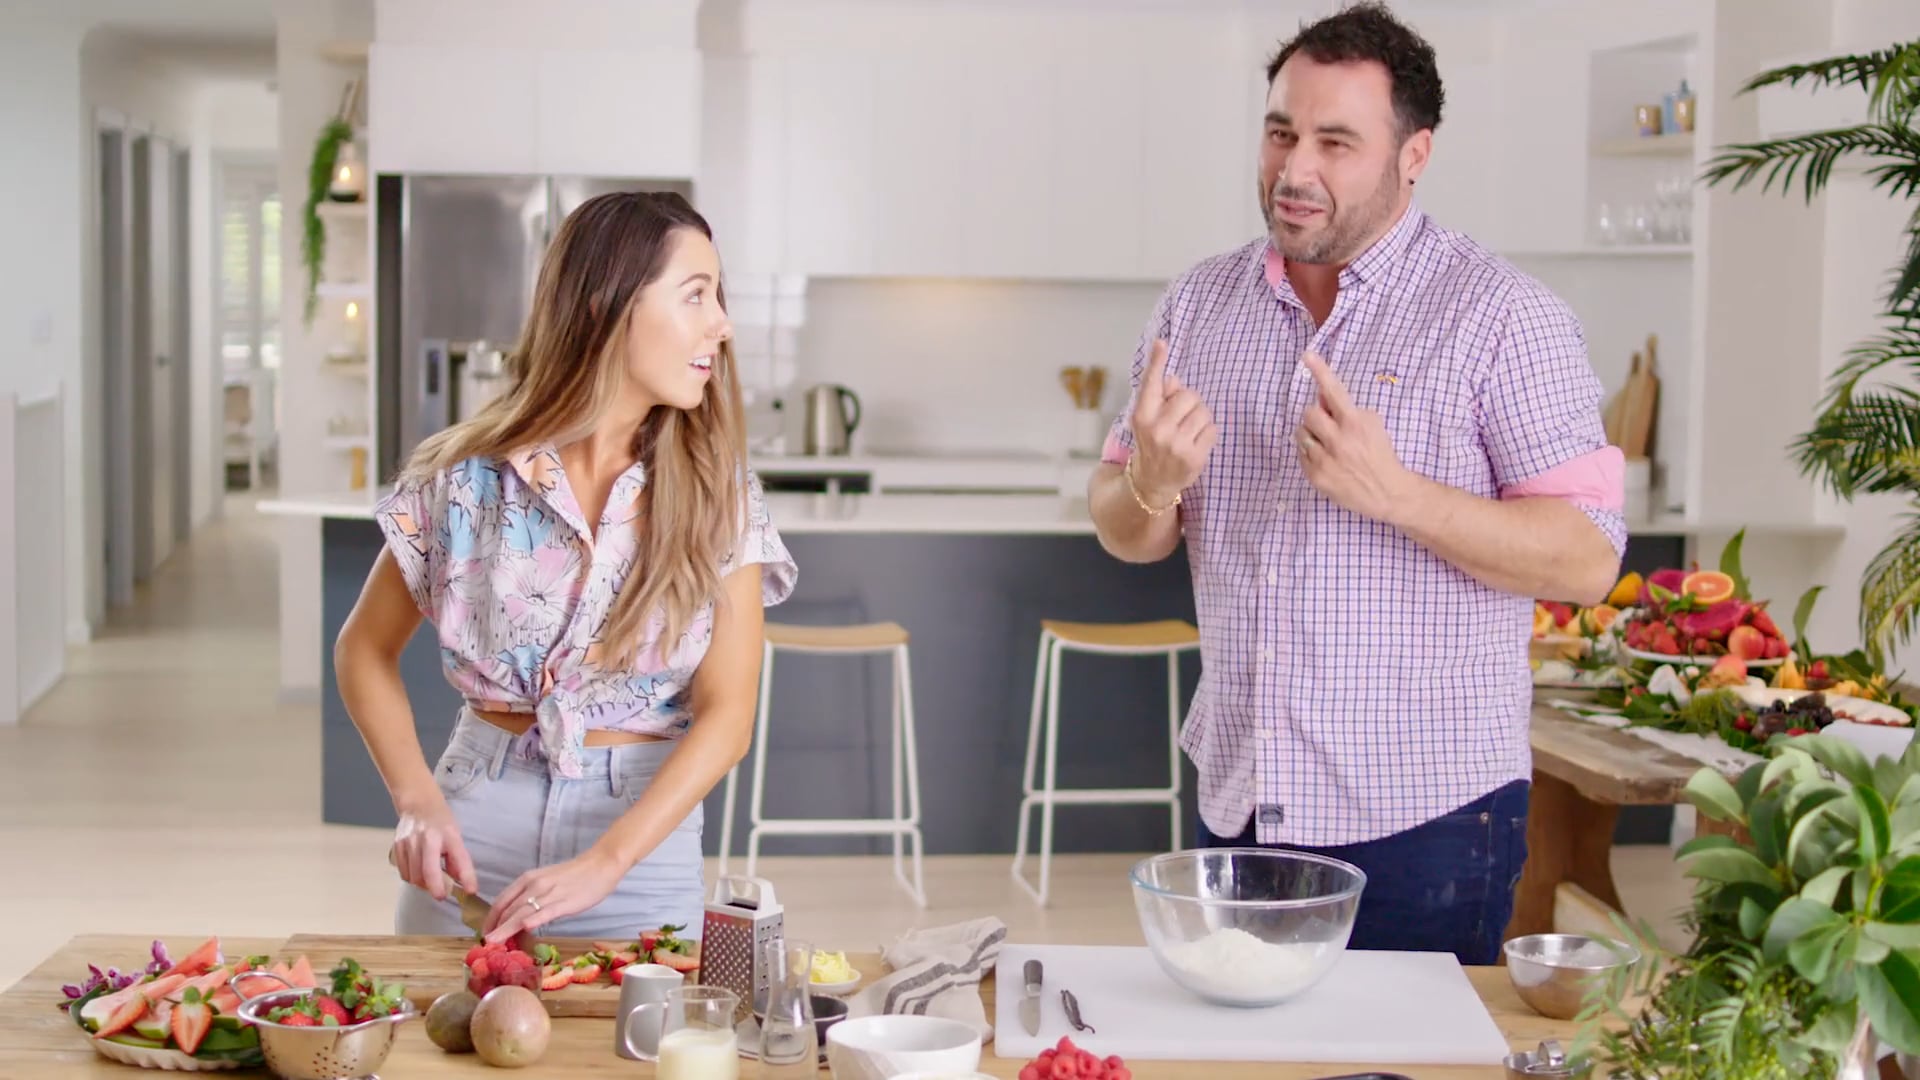 Miguel Maestre - Your Plater Matters